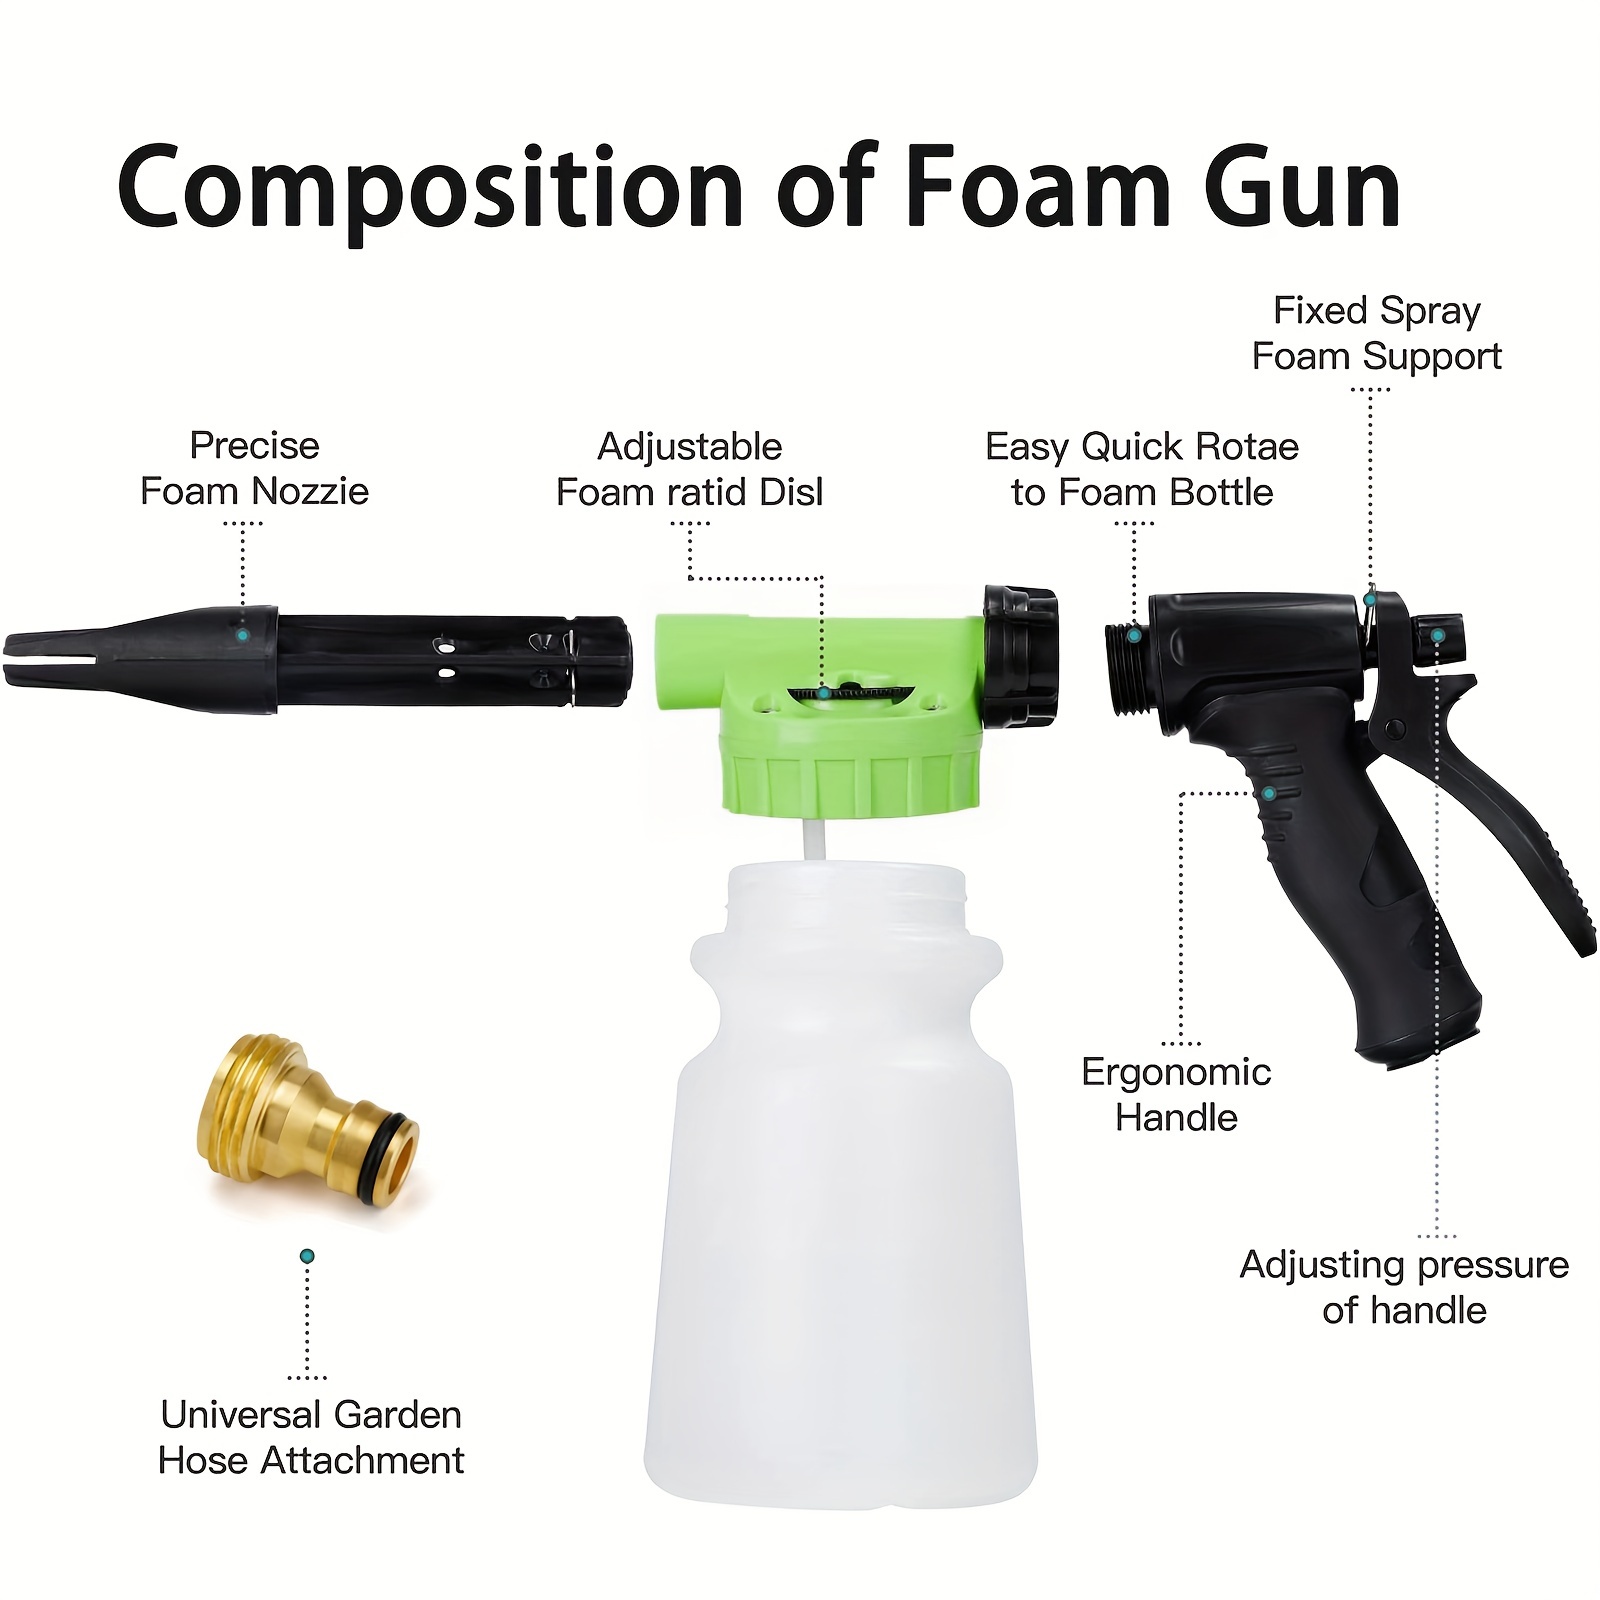 Foam Gun Car Wash Foam Sprayer Soap Foam Blaster, Adjustable Ratio Dial Foam Cannon for Cleaning with Quick Connector to Any Garden Hose (with Wash